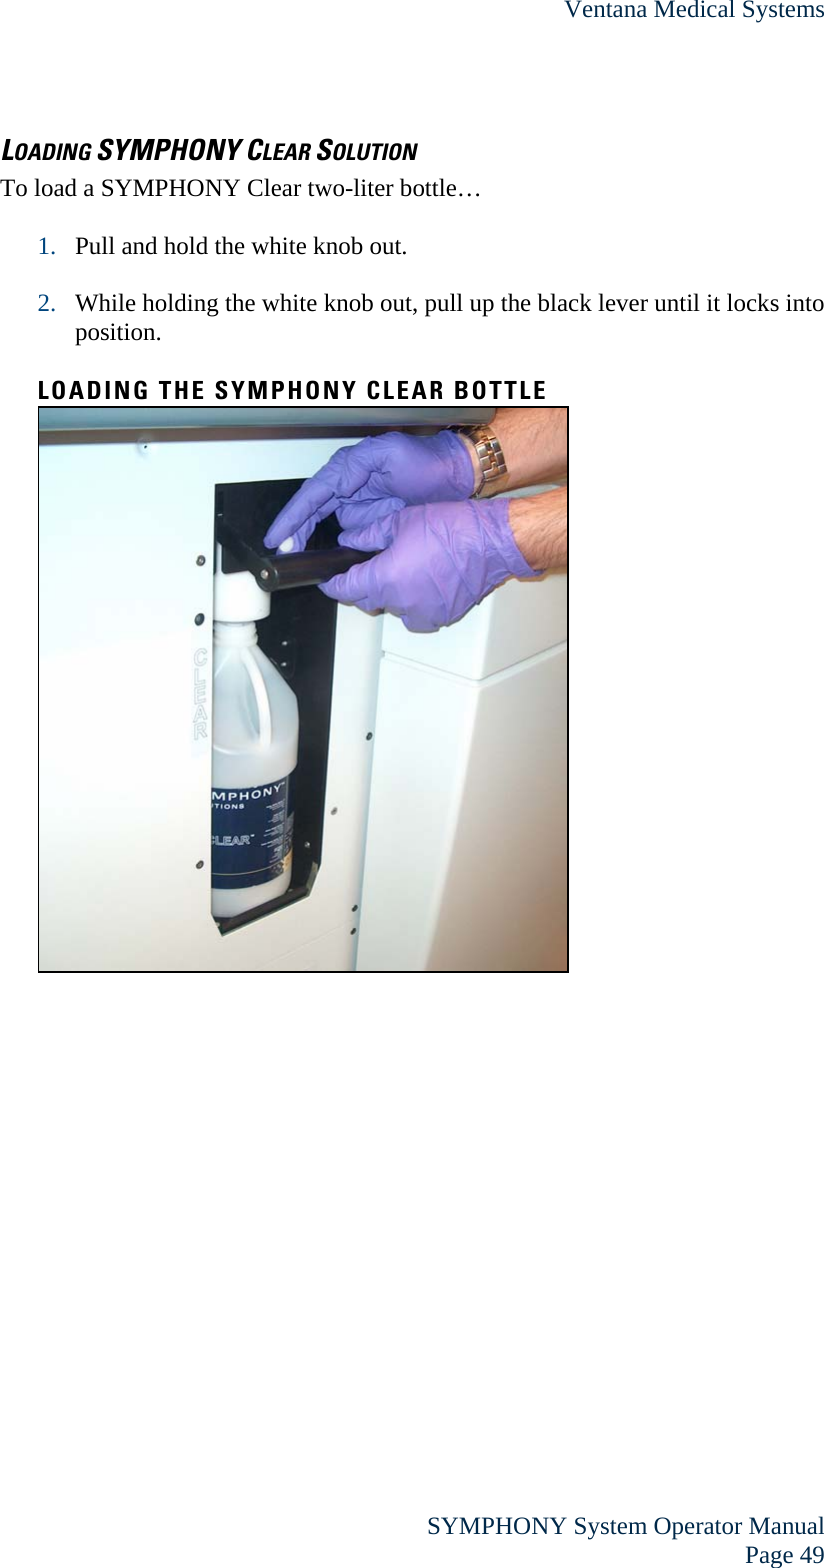 Ventana Medical Systems  SYMPHONY System Operator Manual Page 49 LOADING SYMPHONY CLEAR SOLUTION To load a SYMPHONY Clear two-liter bottle…  1. Pull and hold the white knob out.  2. While holding the white knob out, pull up the black lever until it locks into position.  LOADING THE SYMPHONY CLEAR BOTTLE   